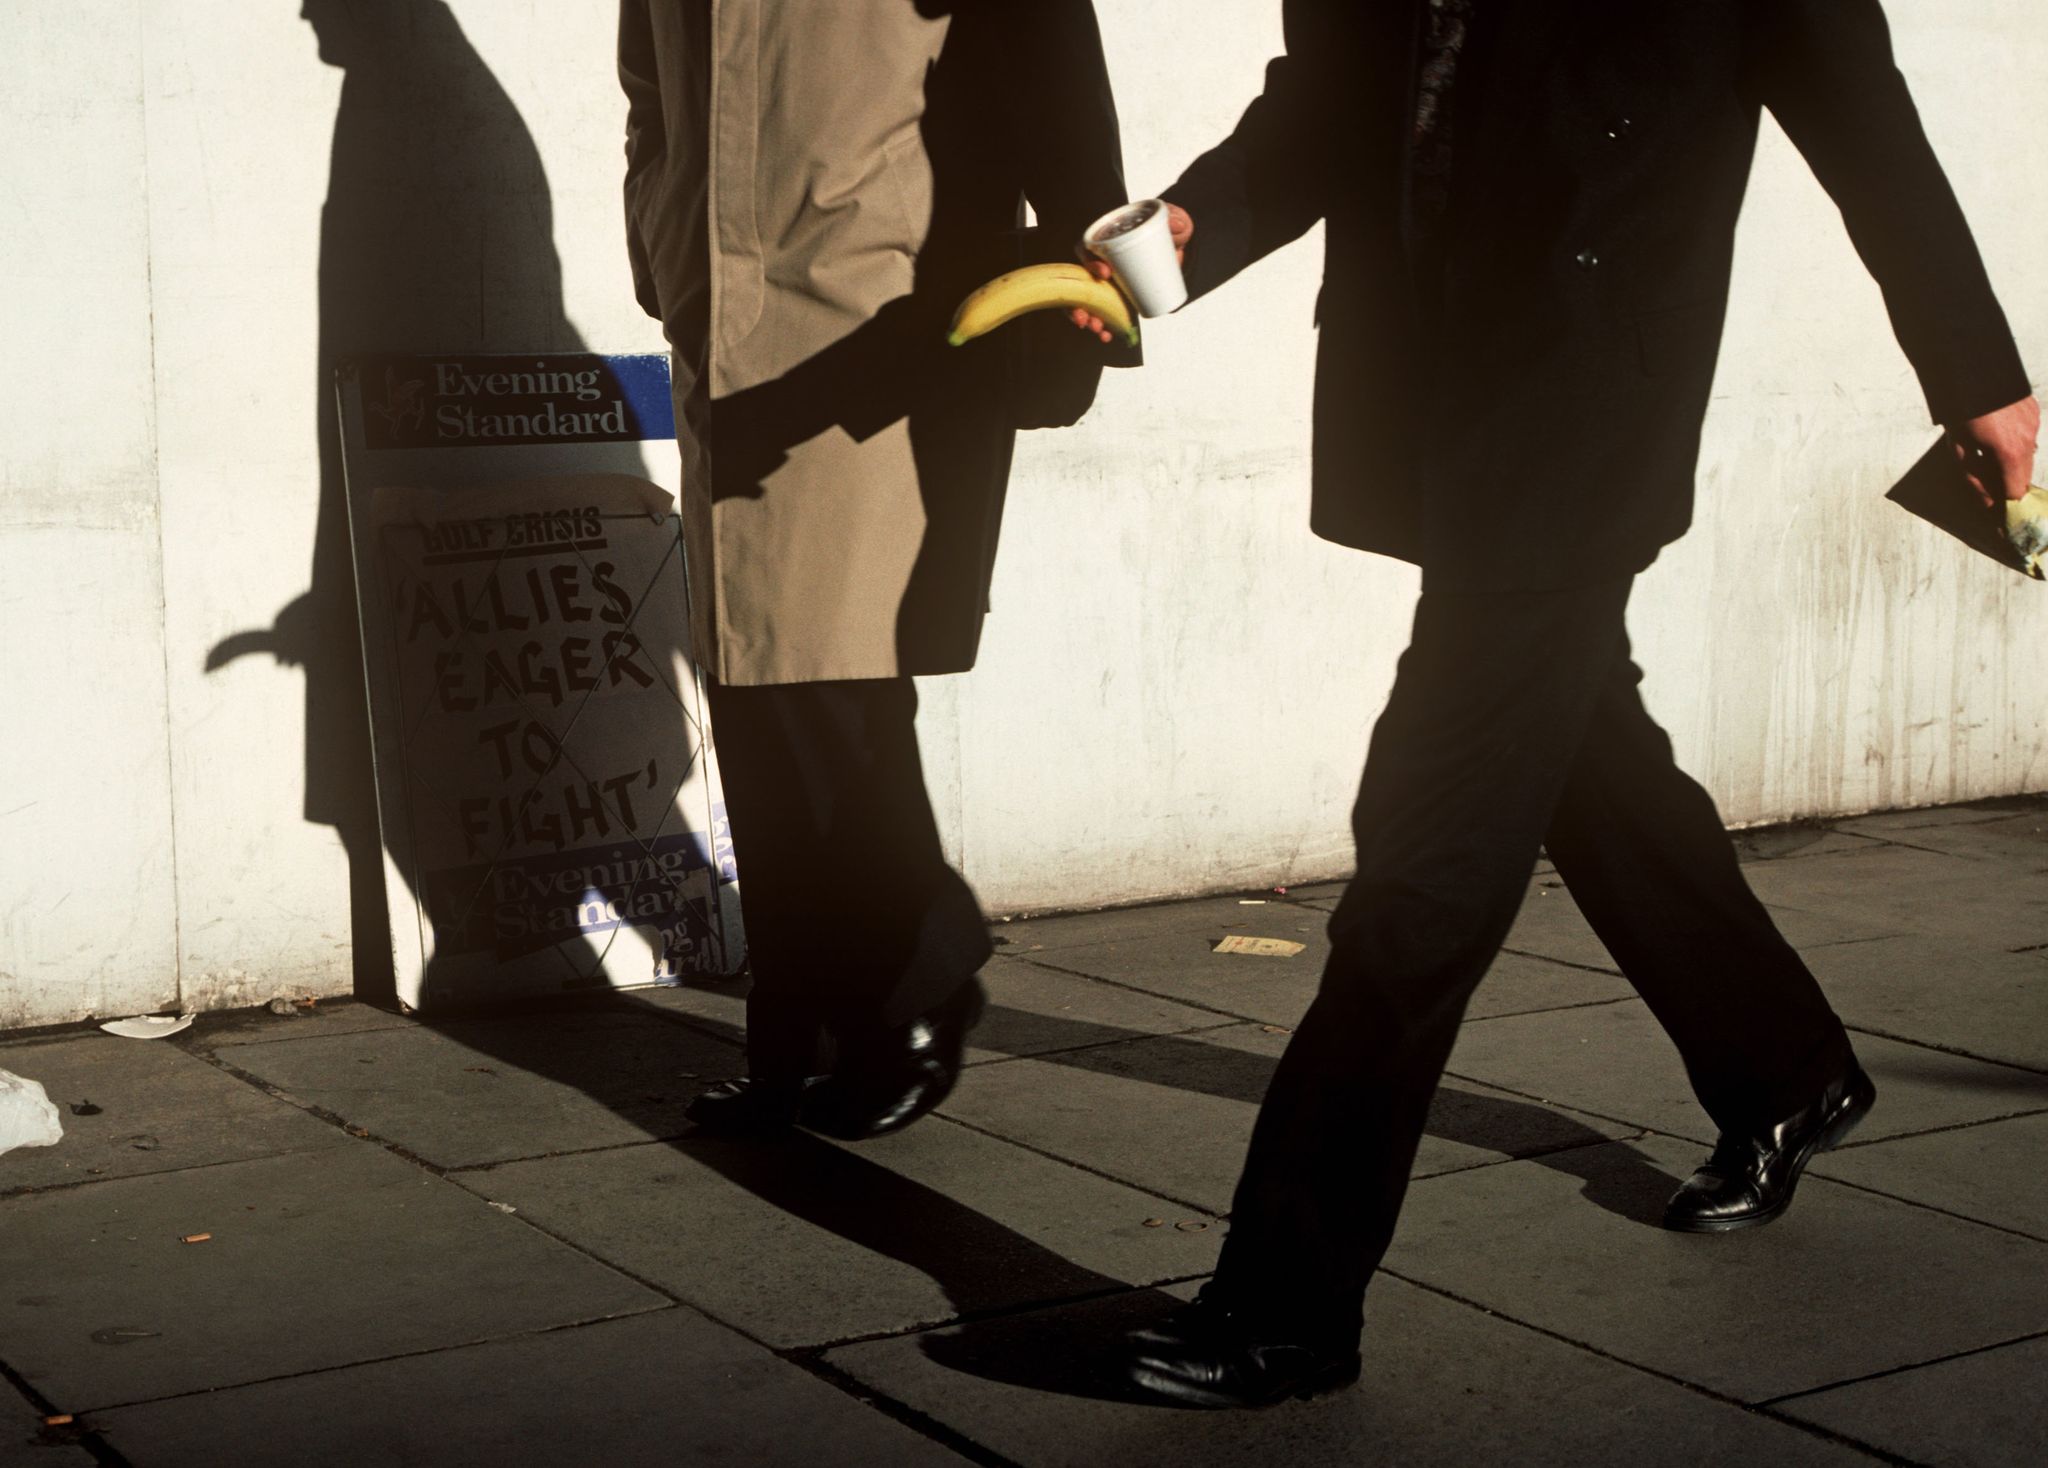 UK - London - Man striding with banana in hand